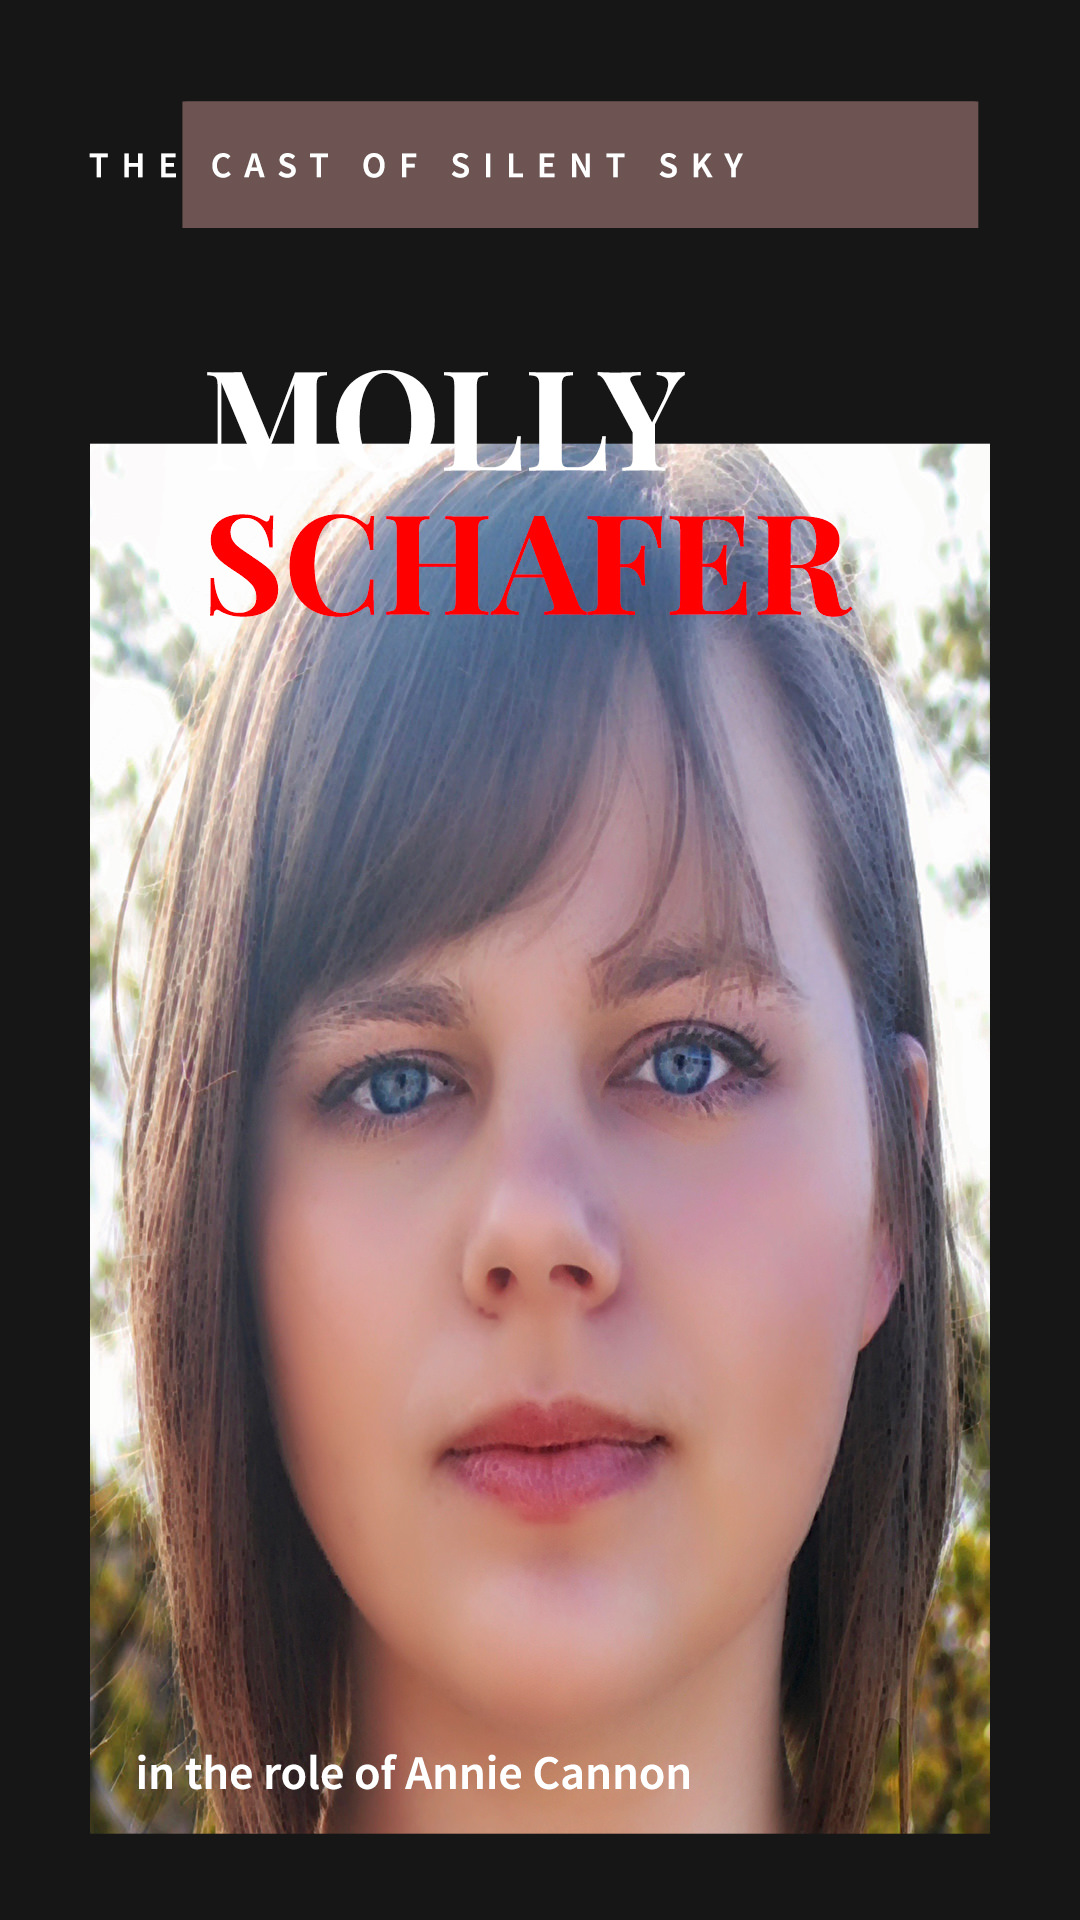 MEET THE CAST - MOLLY SCHAFER in the role of 